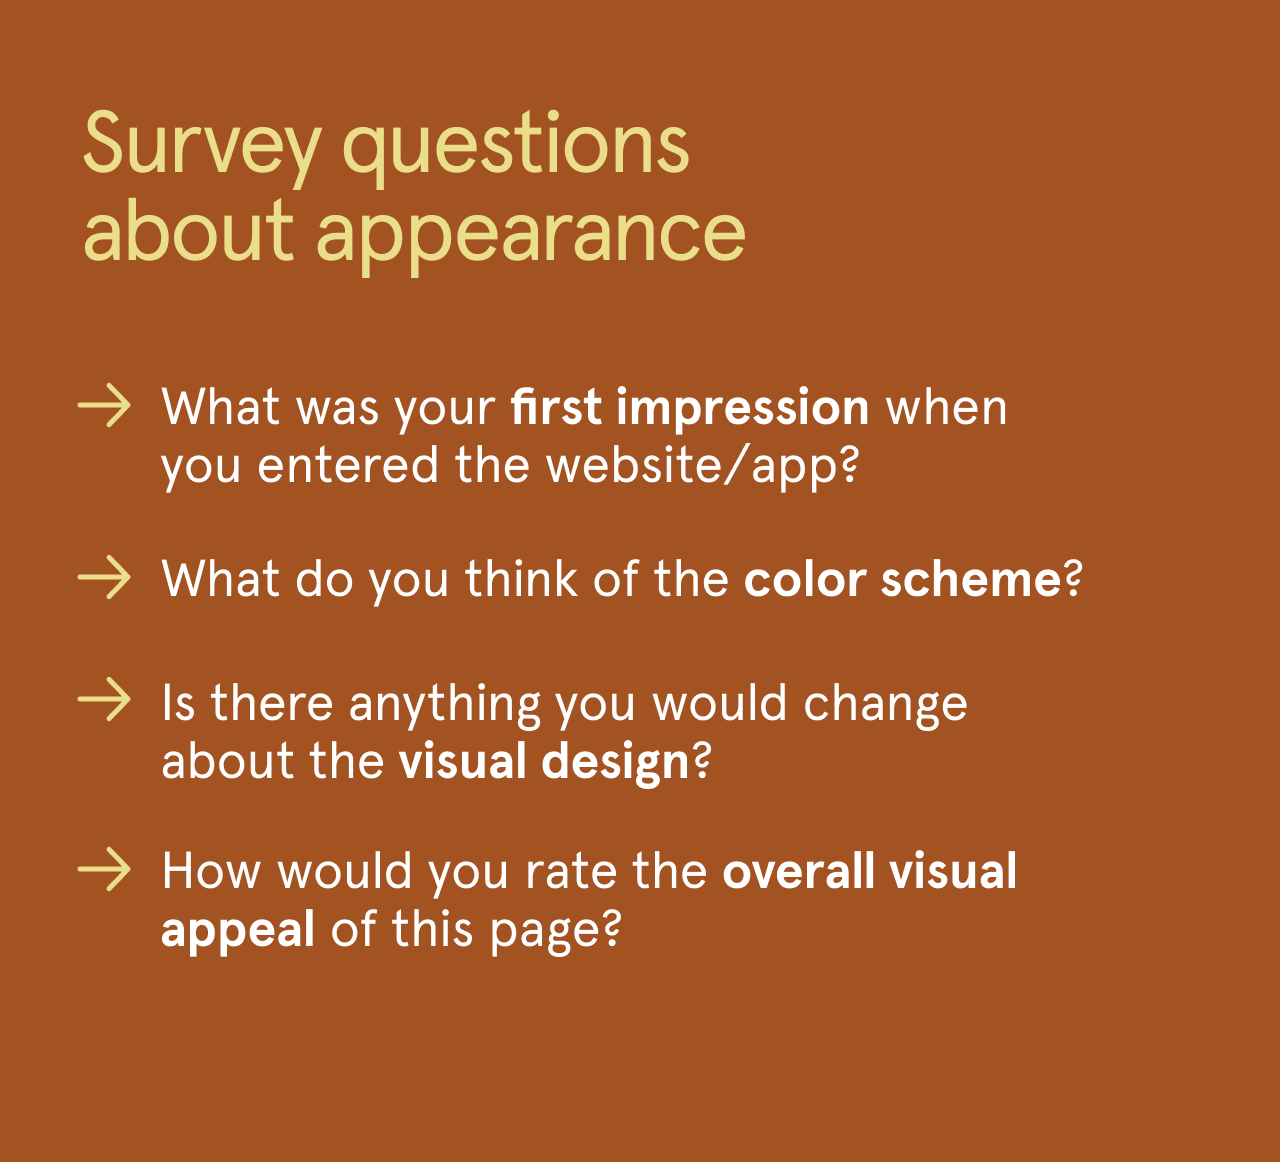 List of appearance-based user experience survey questions.